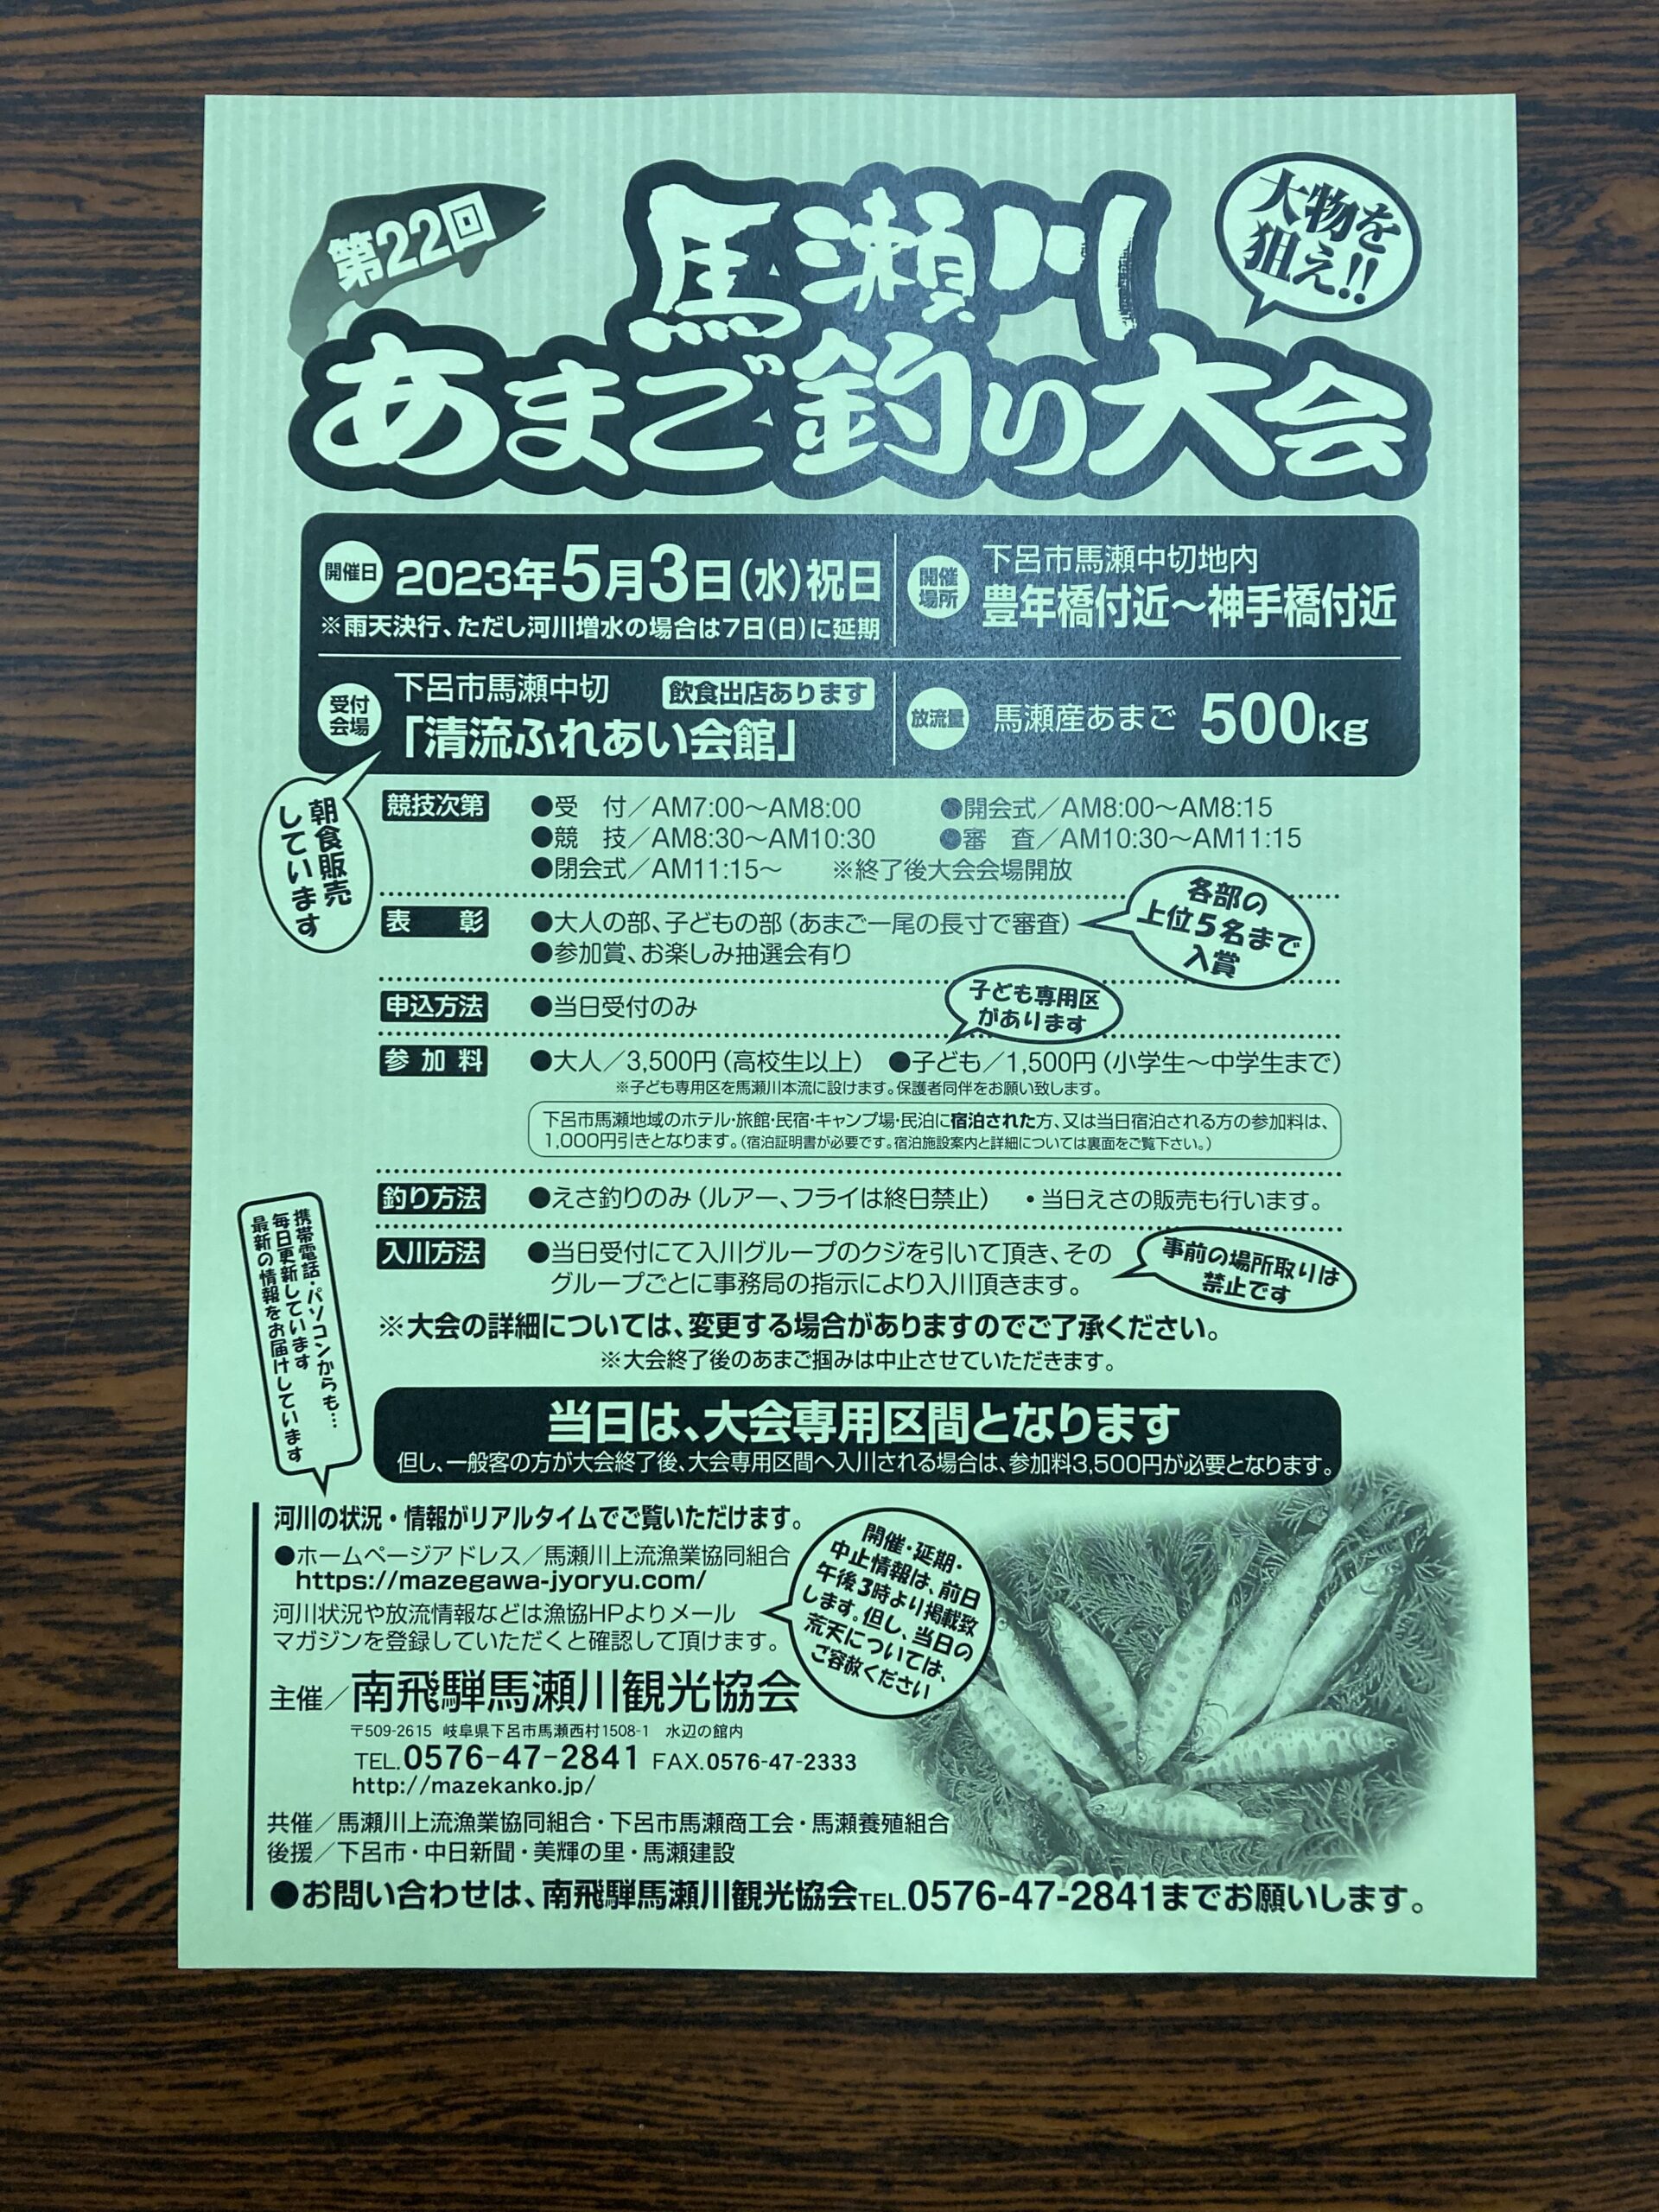 You are currently viewing 馬瀬川あまご釣り大会　５月３日開催